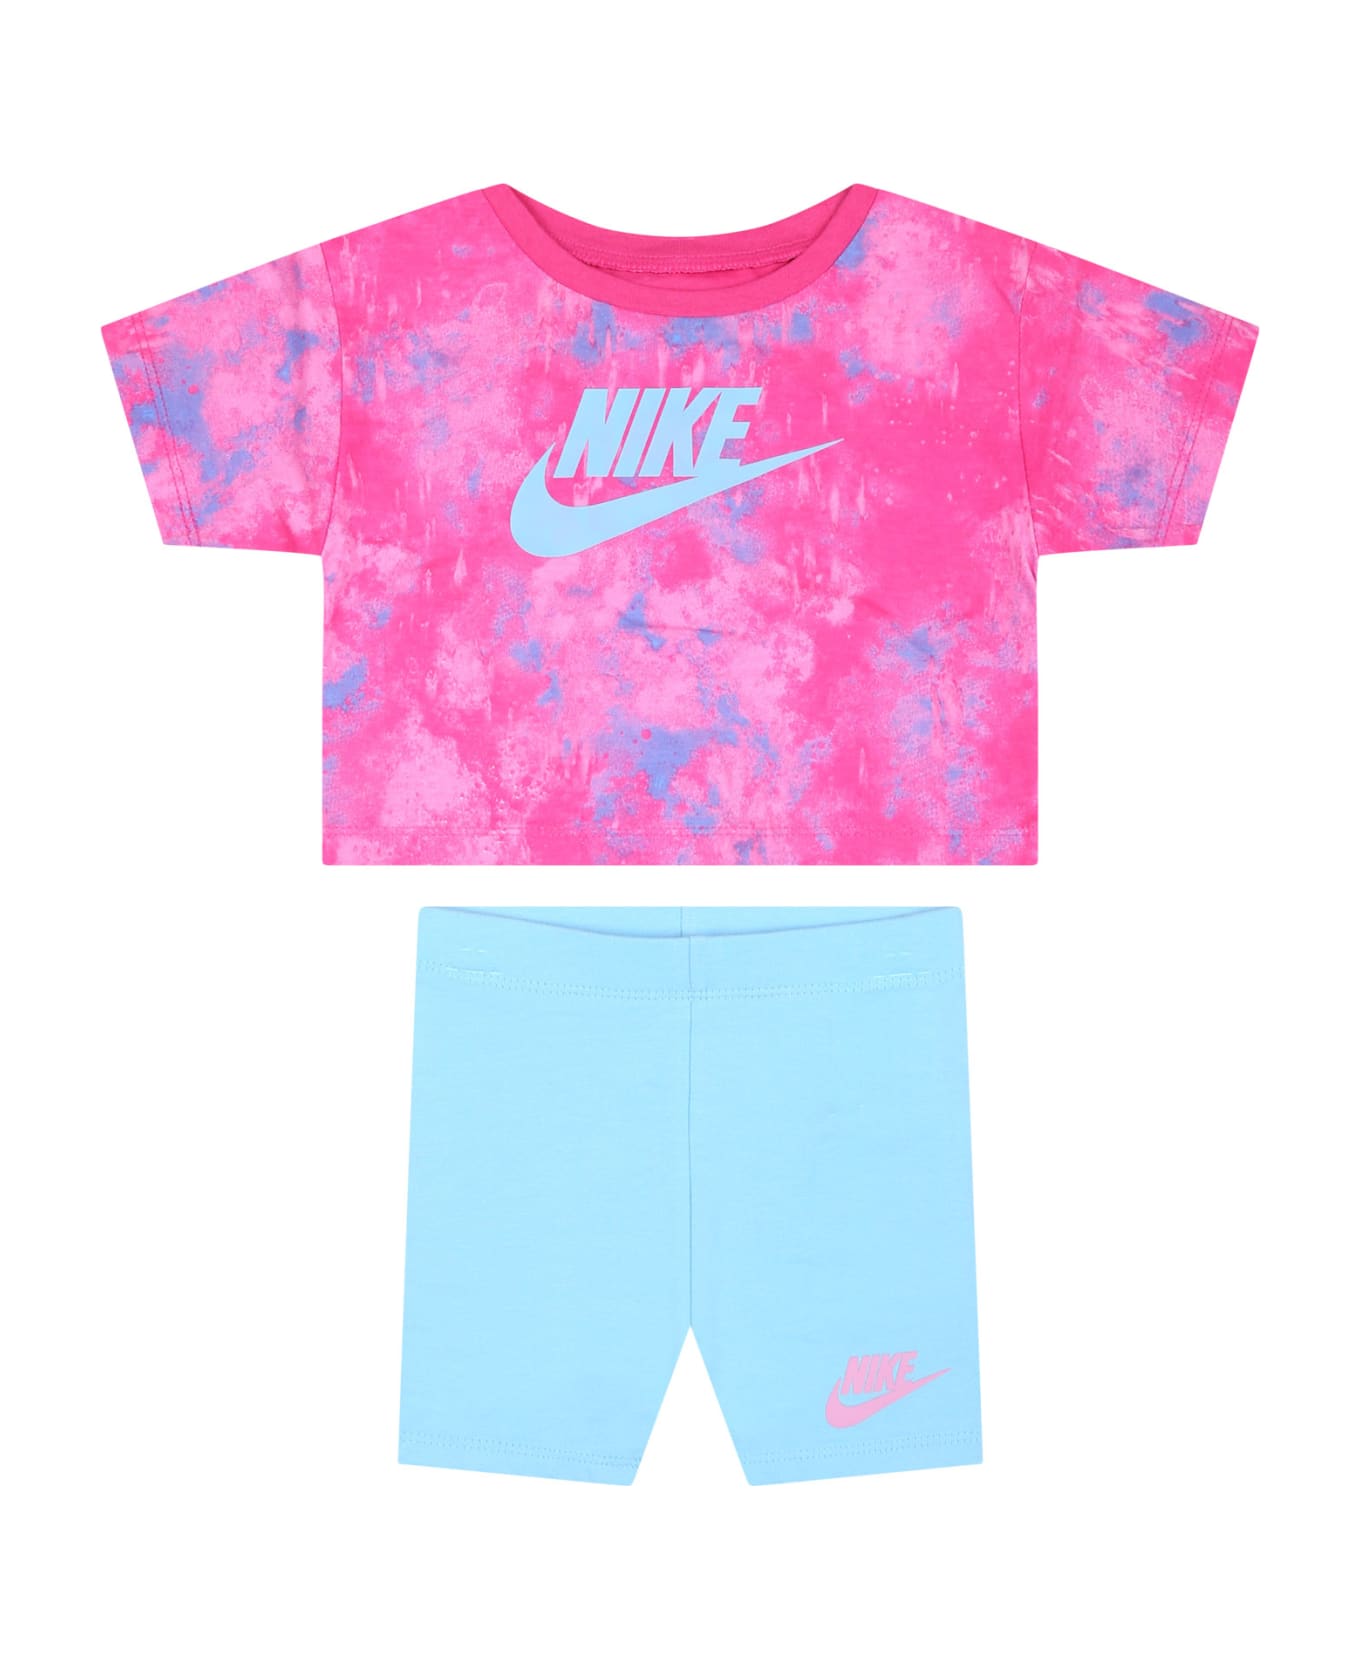 Nike Fuchsia T-shirt For Baby Girl With Logo - Multicolor ボトムス